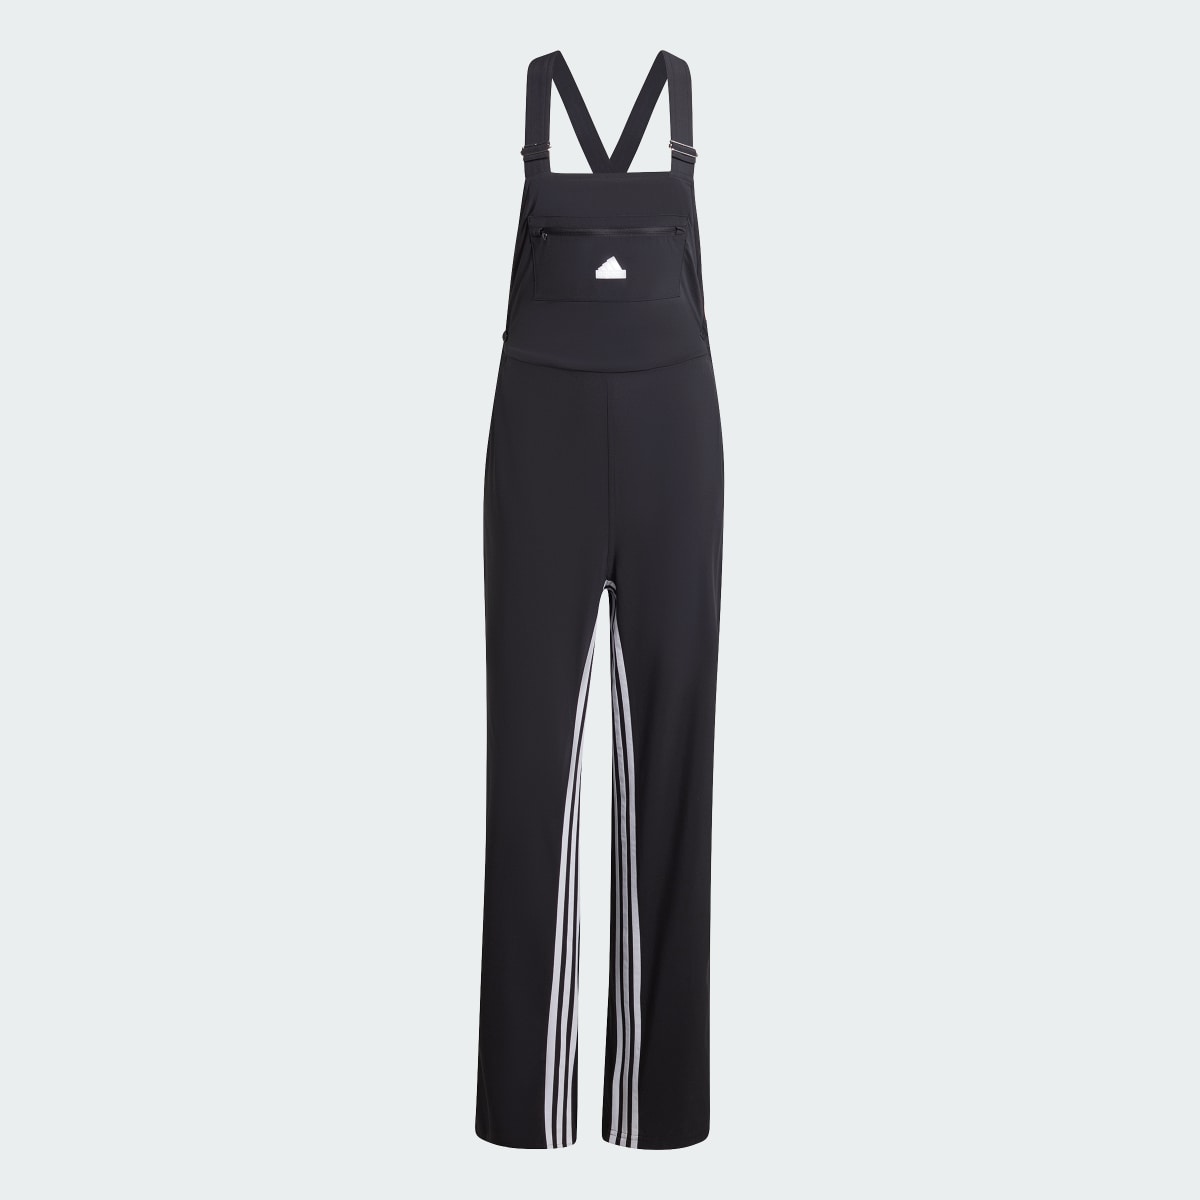 Adidas Dance All-Gender Dungarees. 4